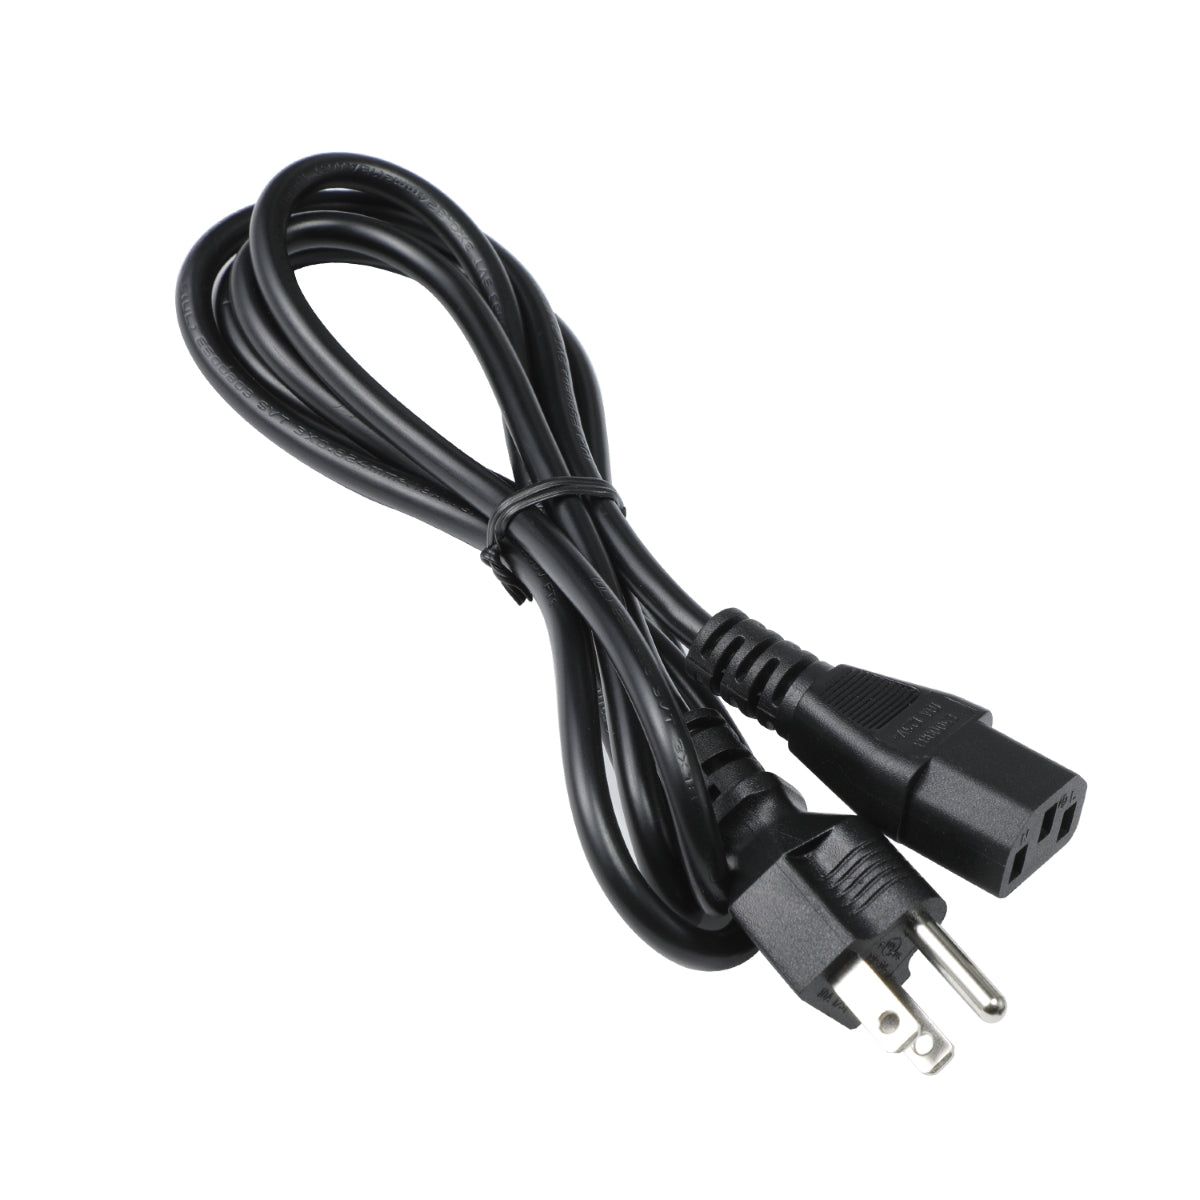 Power Cord for LG 27UD59-B Monitor TV.